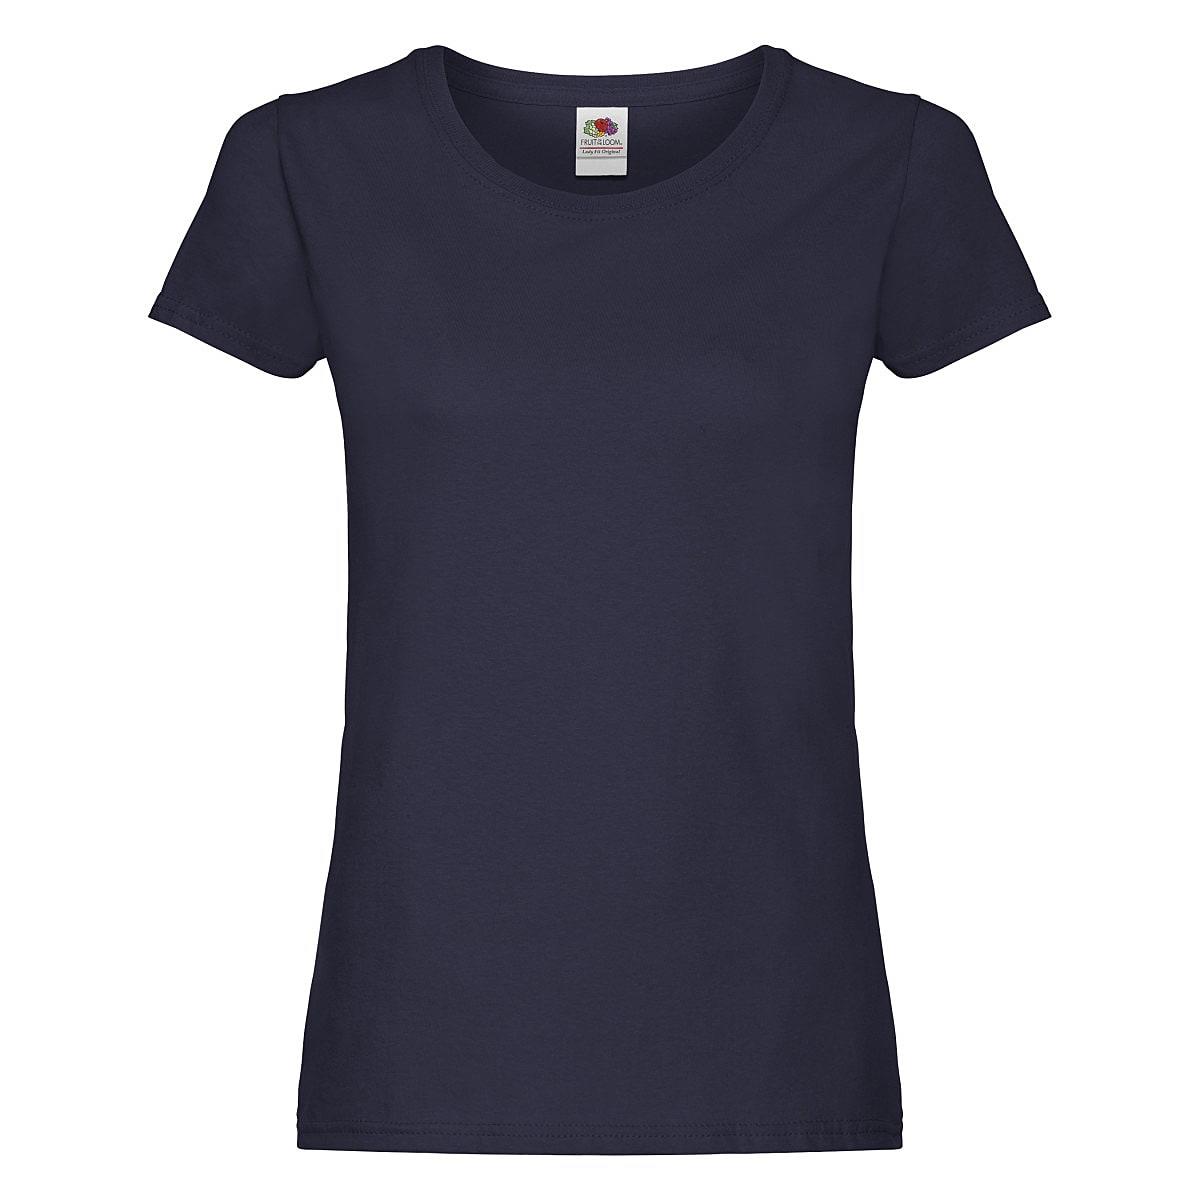 Fruit Of The Loom Lady Fit Original T-Shirt in Deep Navy (Product Code: 61420)